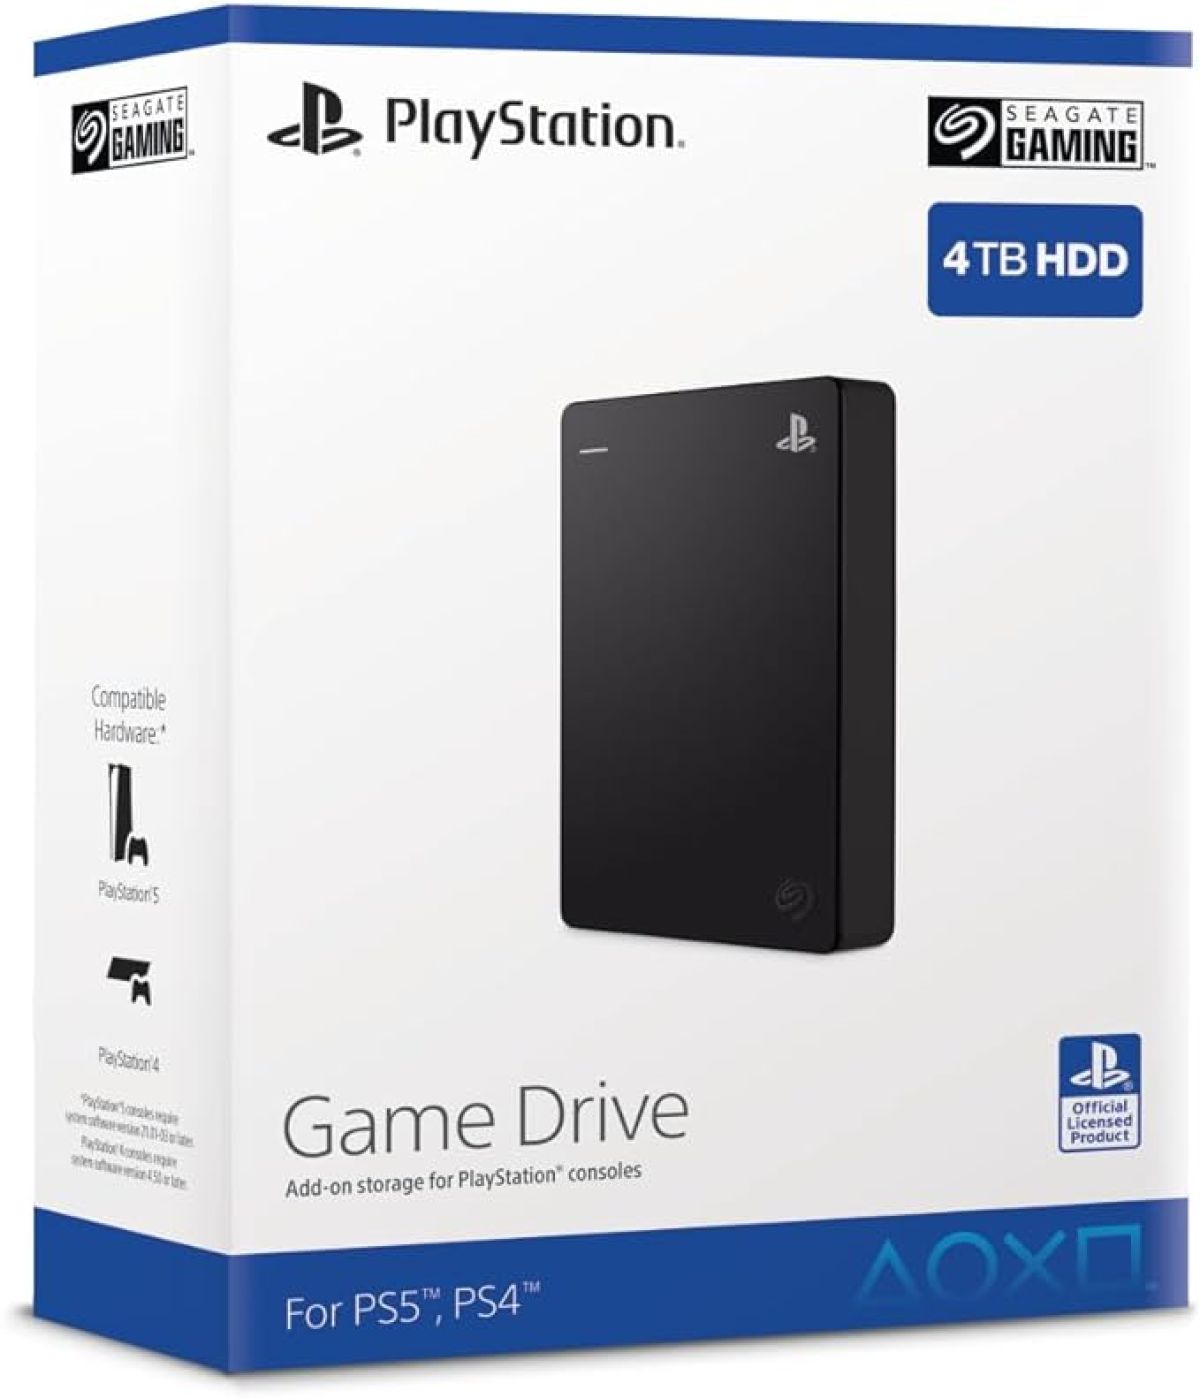 Seagate game drive ps4 4to